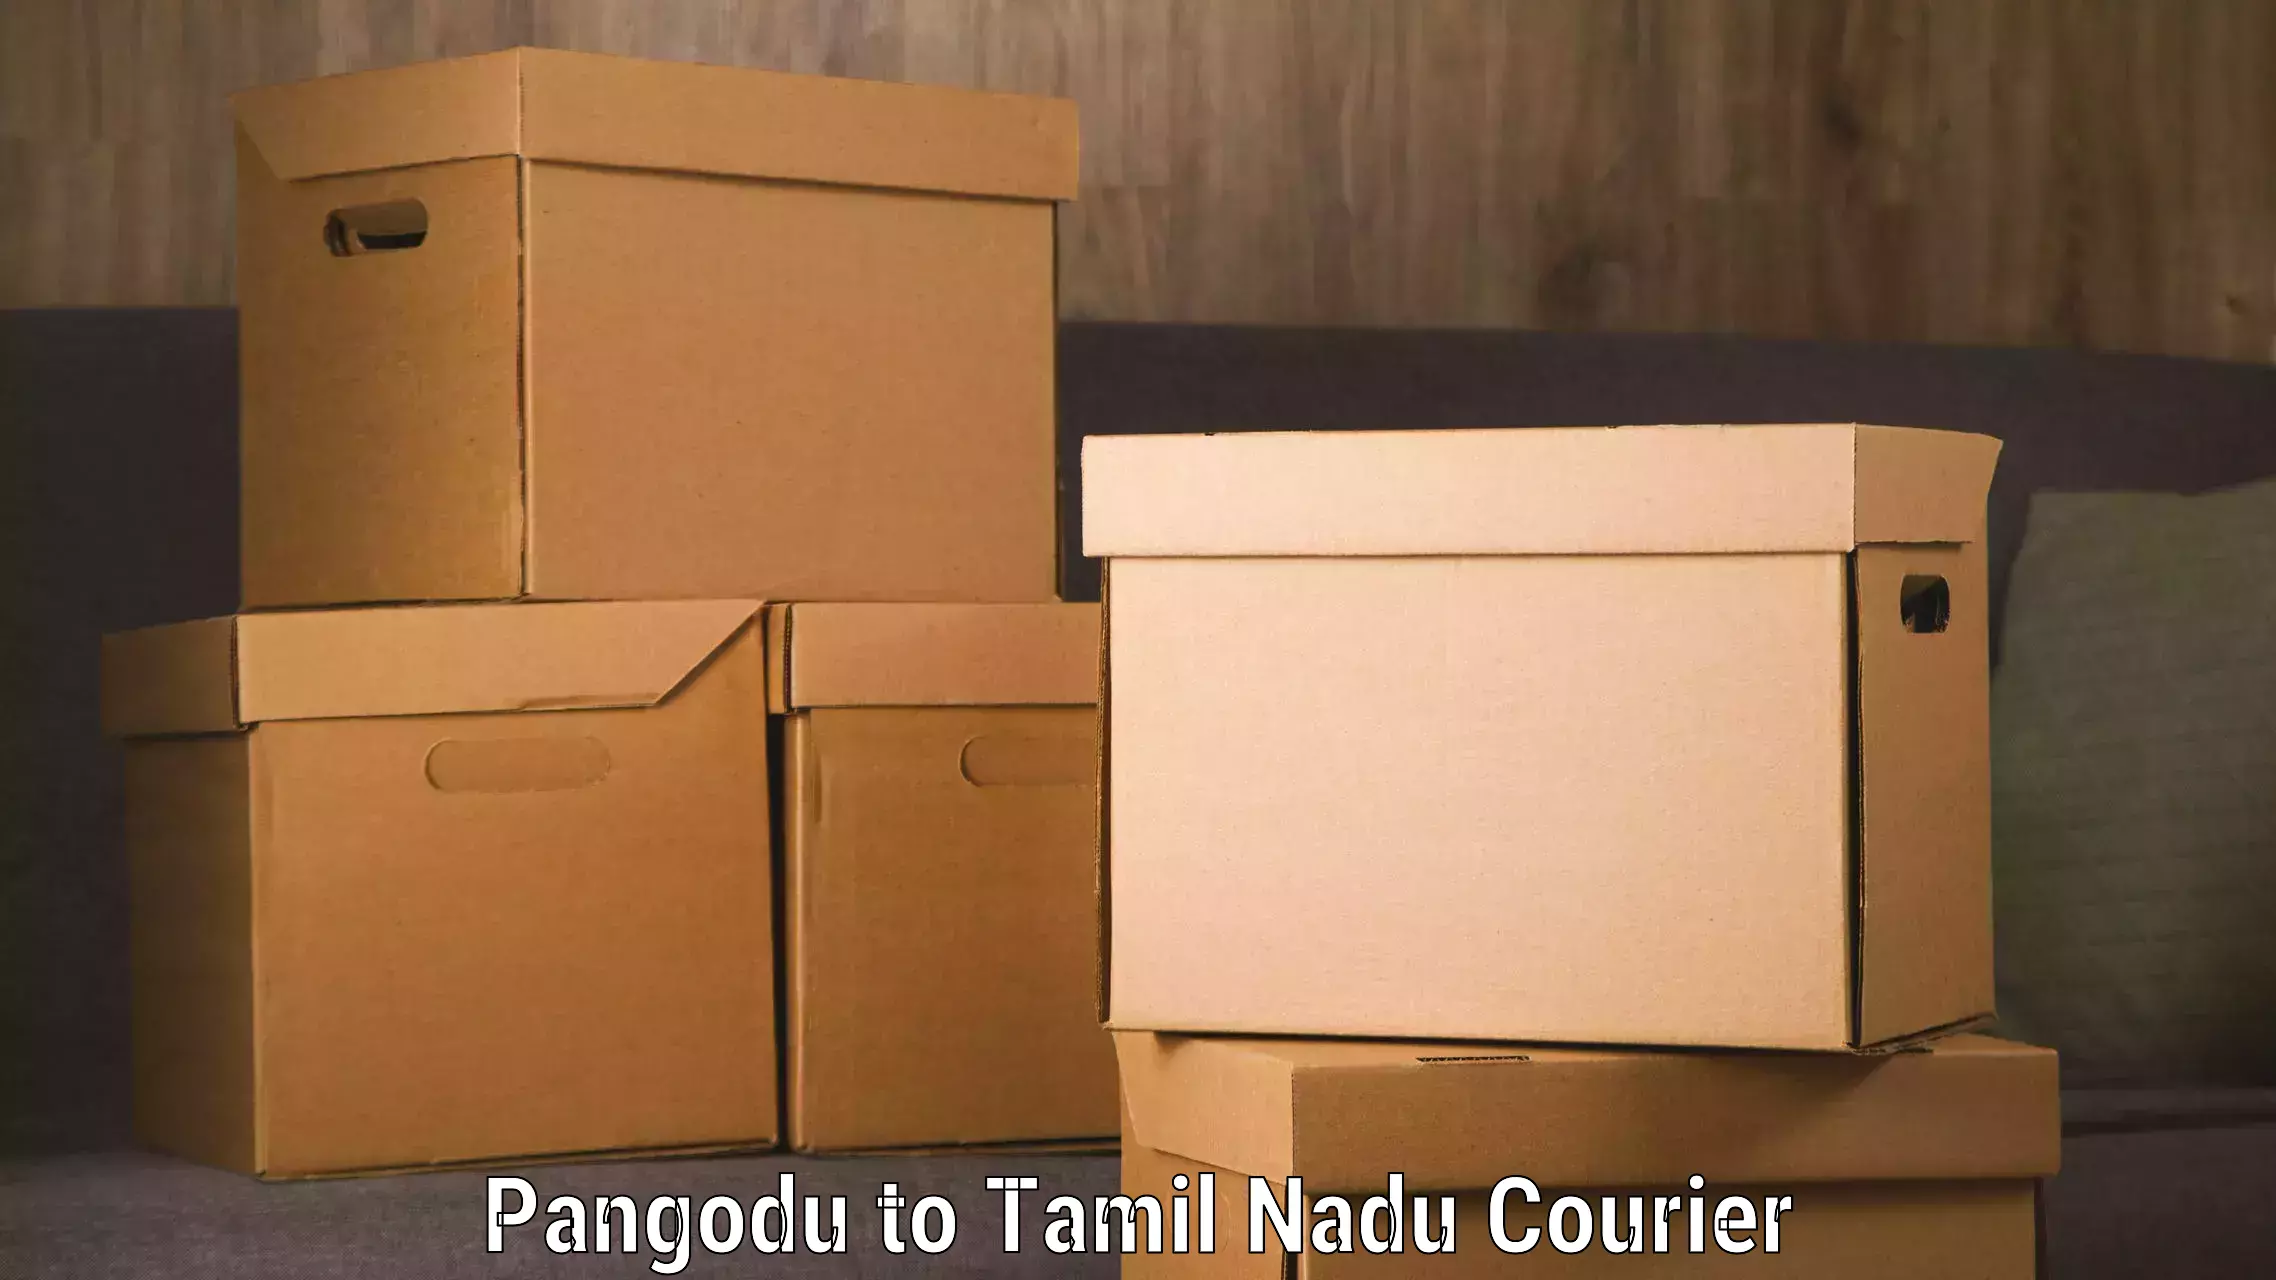 Efficient package consolidation Pangodu to Tamil Nadu